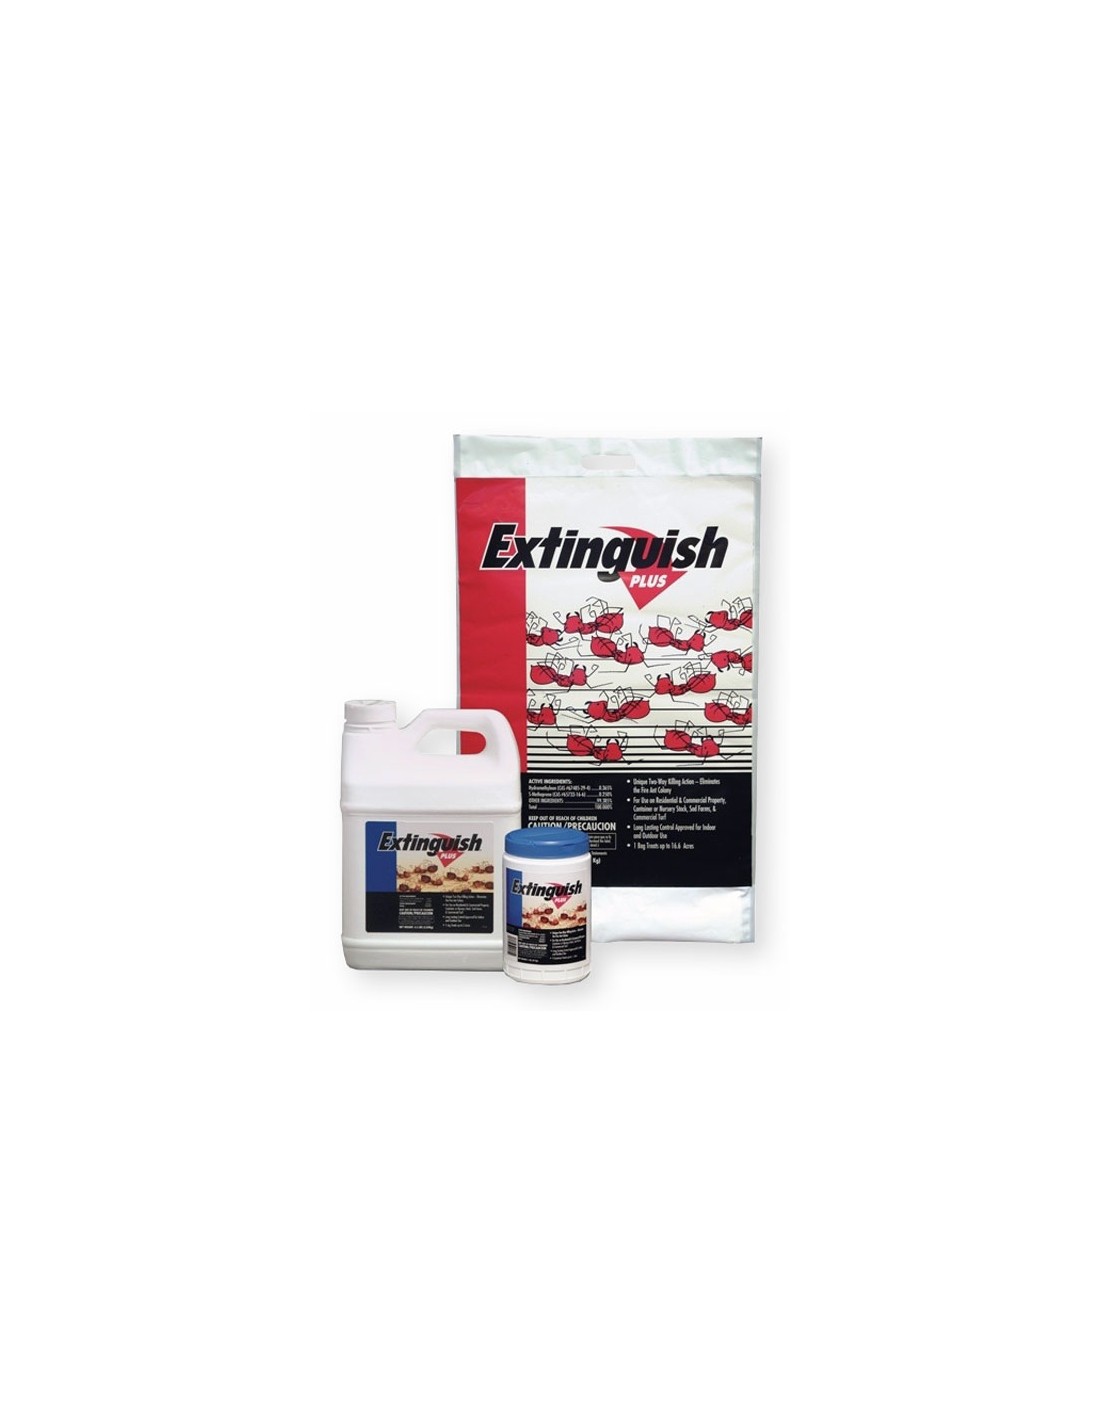 Extinguish Plus Fire Ant Control Questions & Answers